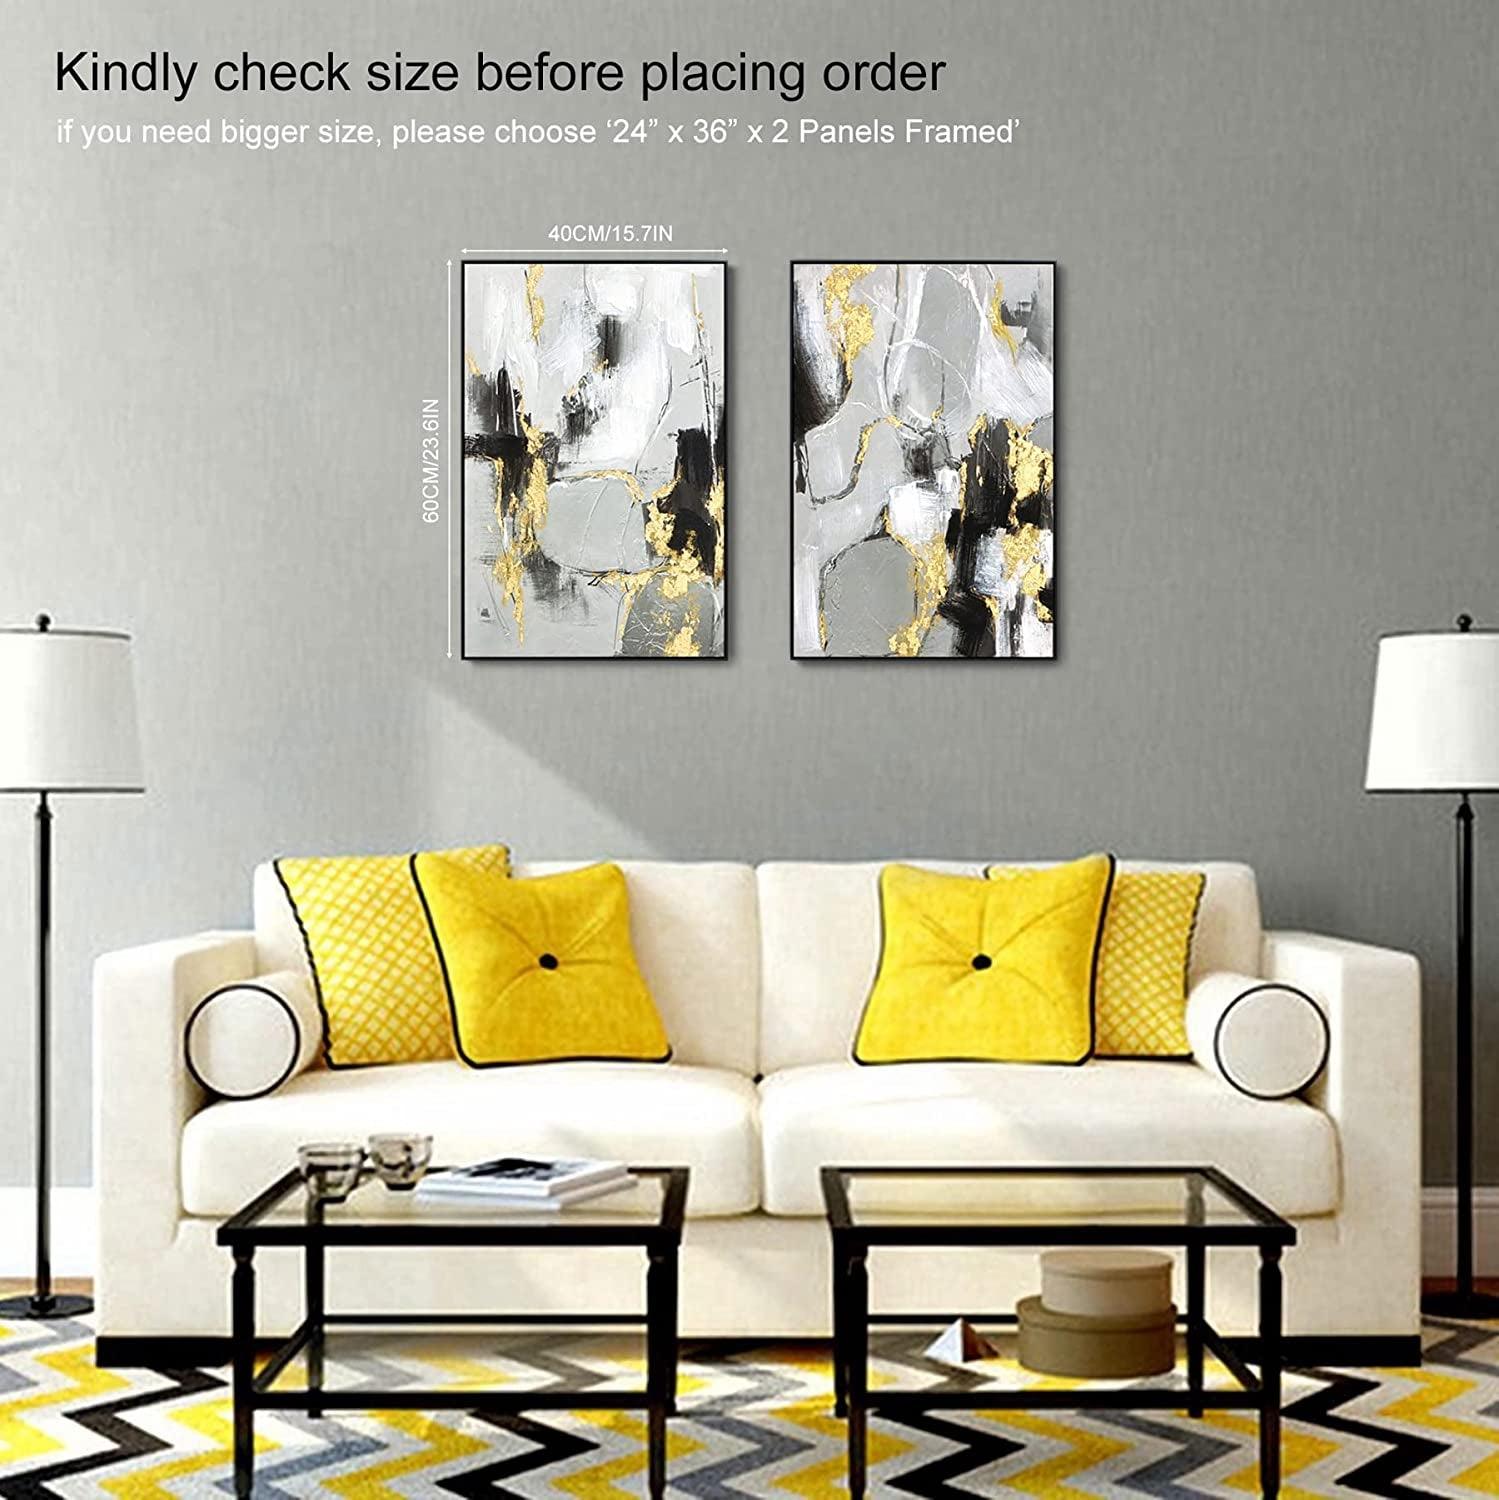 Black and Gold Abstract Wall -Art Decor- 2 Pack 16" X 24" Black and White Canvas Wall Decor with Gold Foil for Living Room, Bedroom, Office, Framed, Ready to Hang